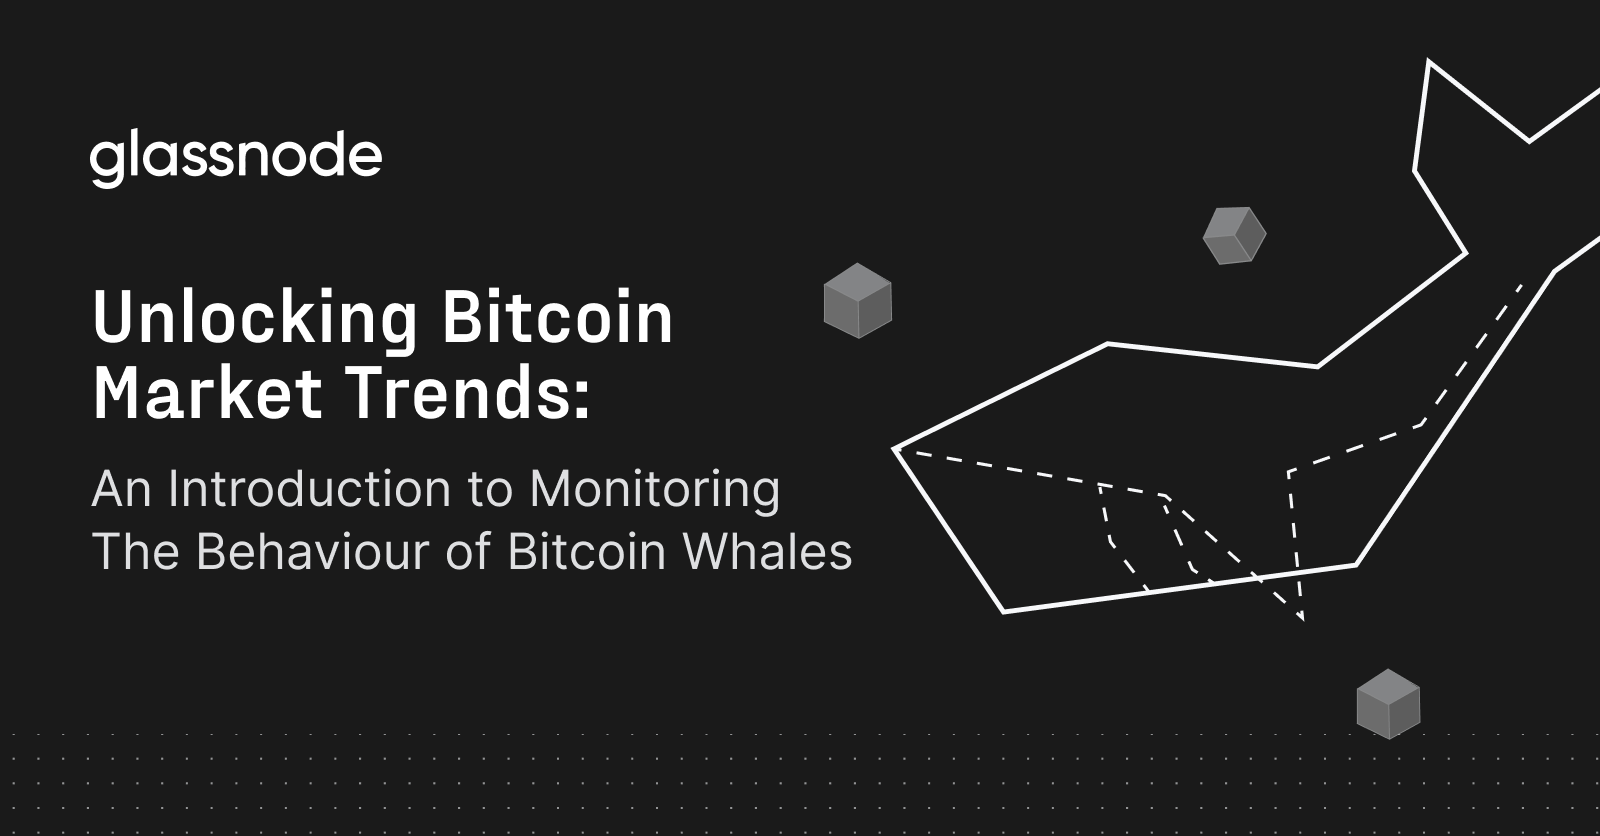 An Introduction to Monitoring The Behaviour of Bitcoin Whales